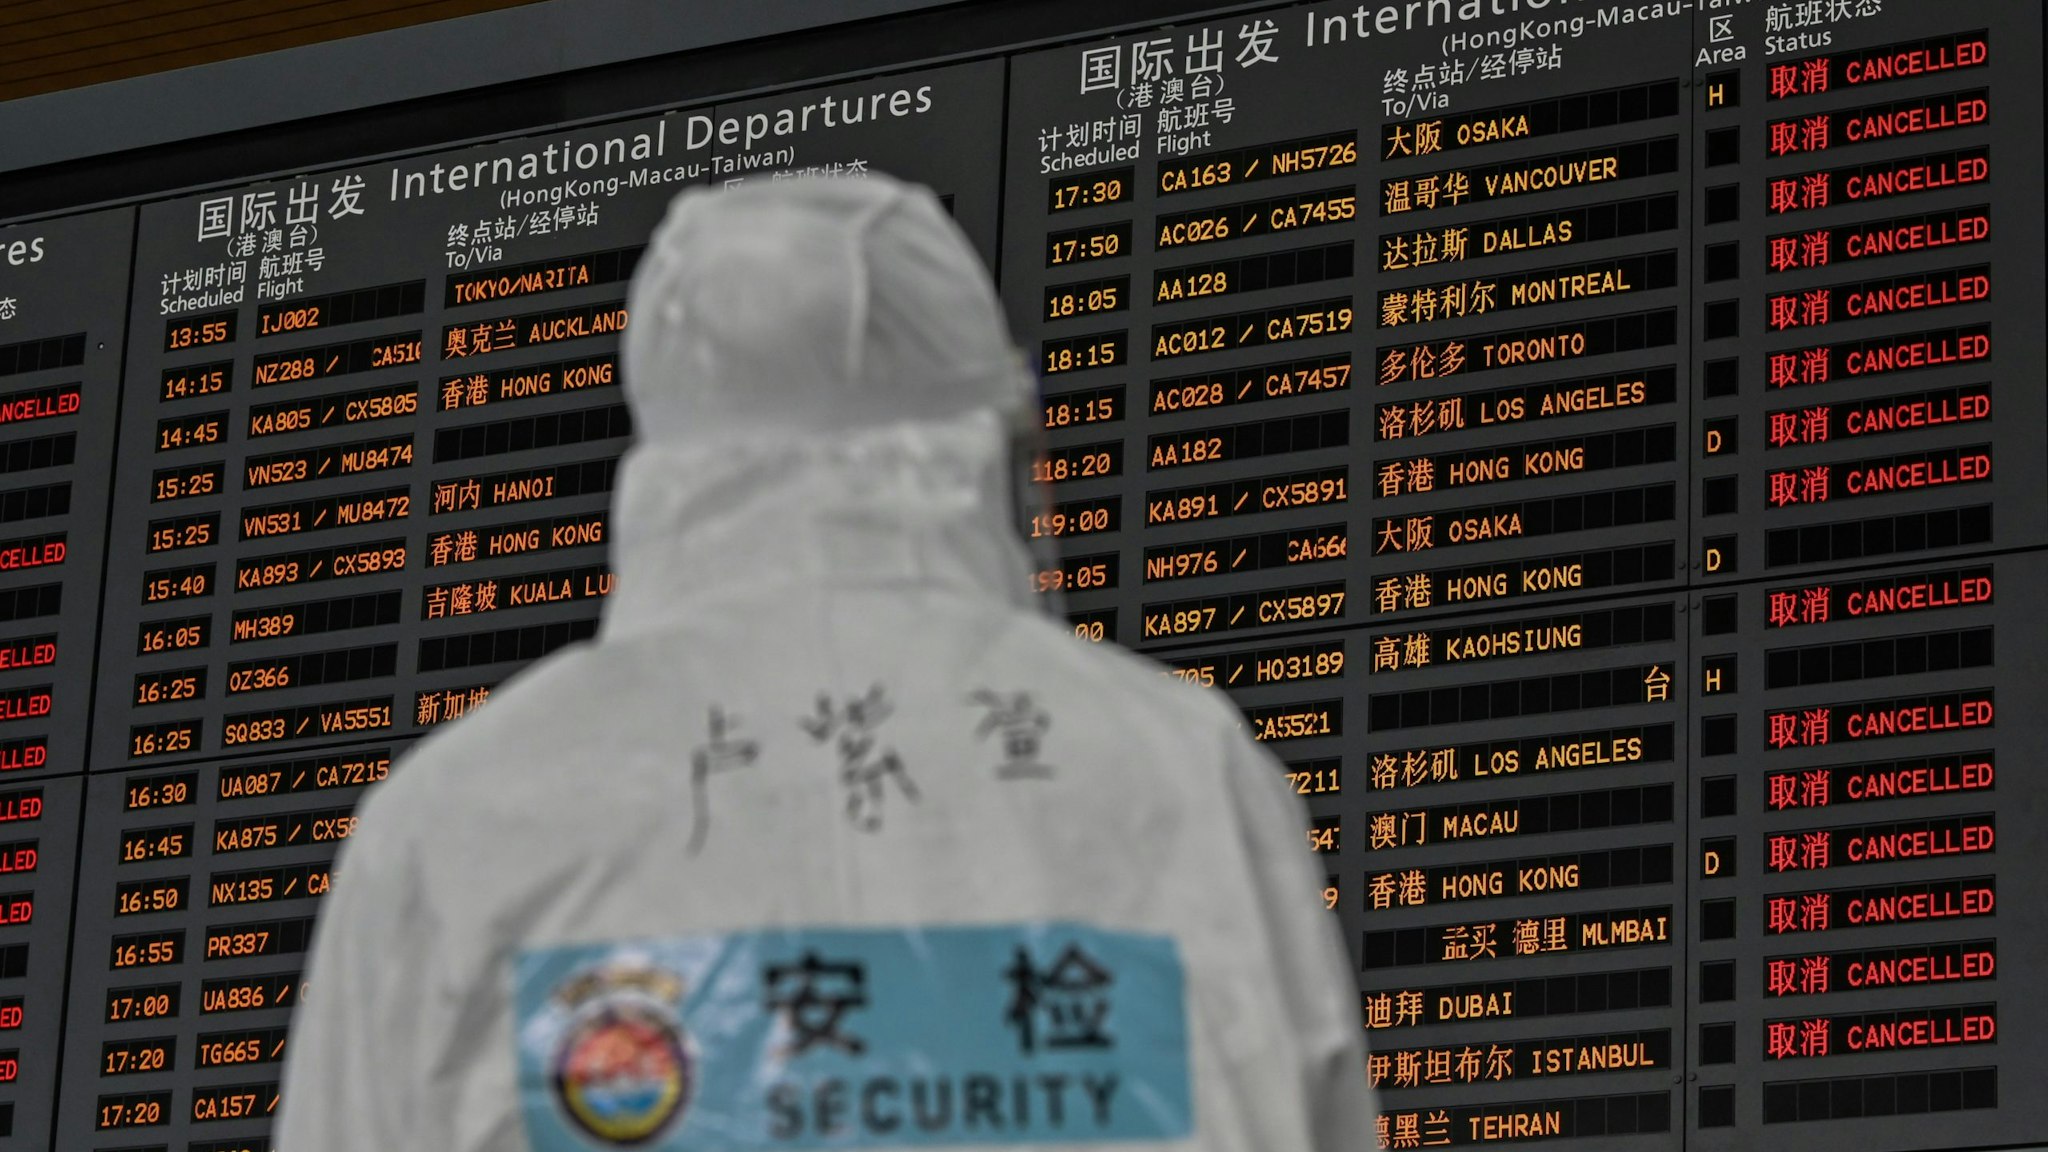 TOPSHOT - An airport security worker wearing protective gear, amid concerns of the COVID-19 coronavirus, looks at a screen showing international departures at Shanghai Pudong International Airport in Shanghai in March 19, 2020. - China on March 19 reported no new domestic cases of the coronavirus for the first time since it started recording them in January, but recorded a spike in infections from abroad. (Photo by Hector RETAMAL / AFP) (Photo by HECTOR RETAMAL/AFP via Getty Images)